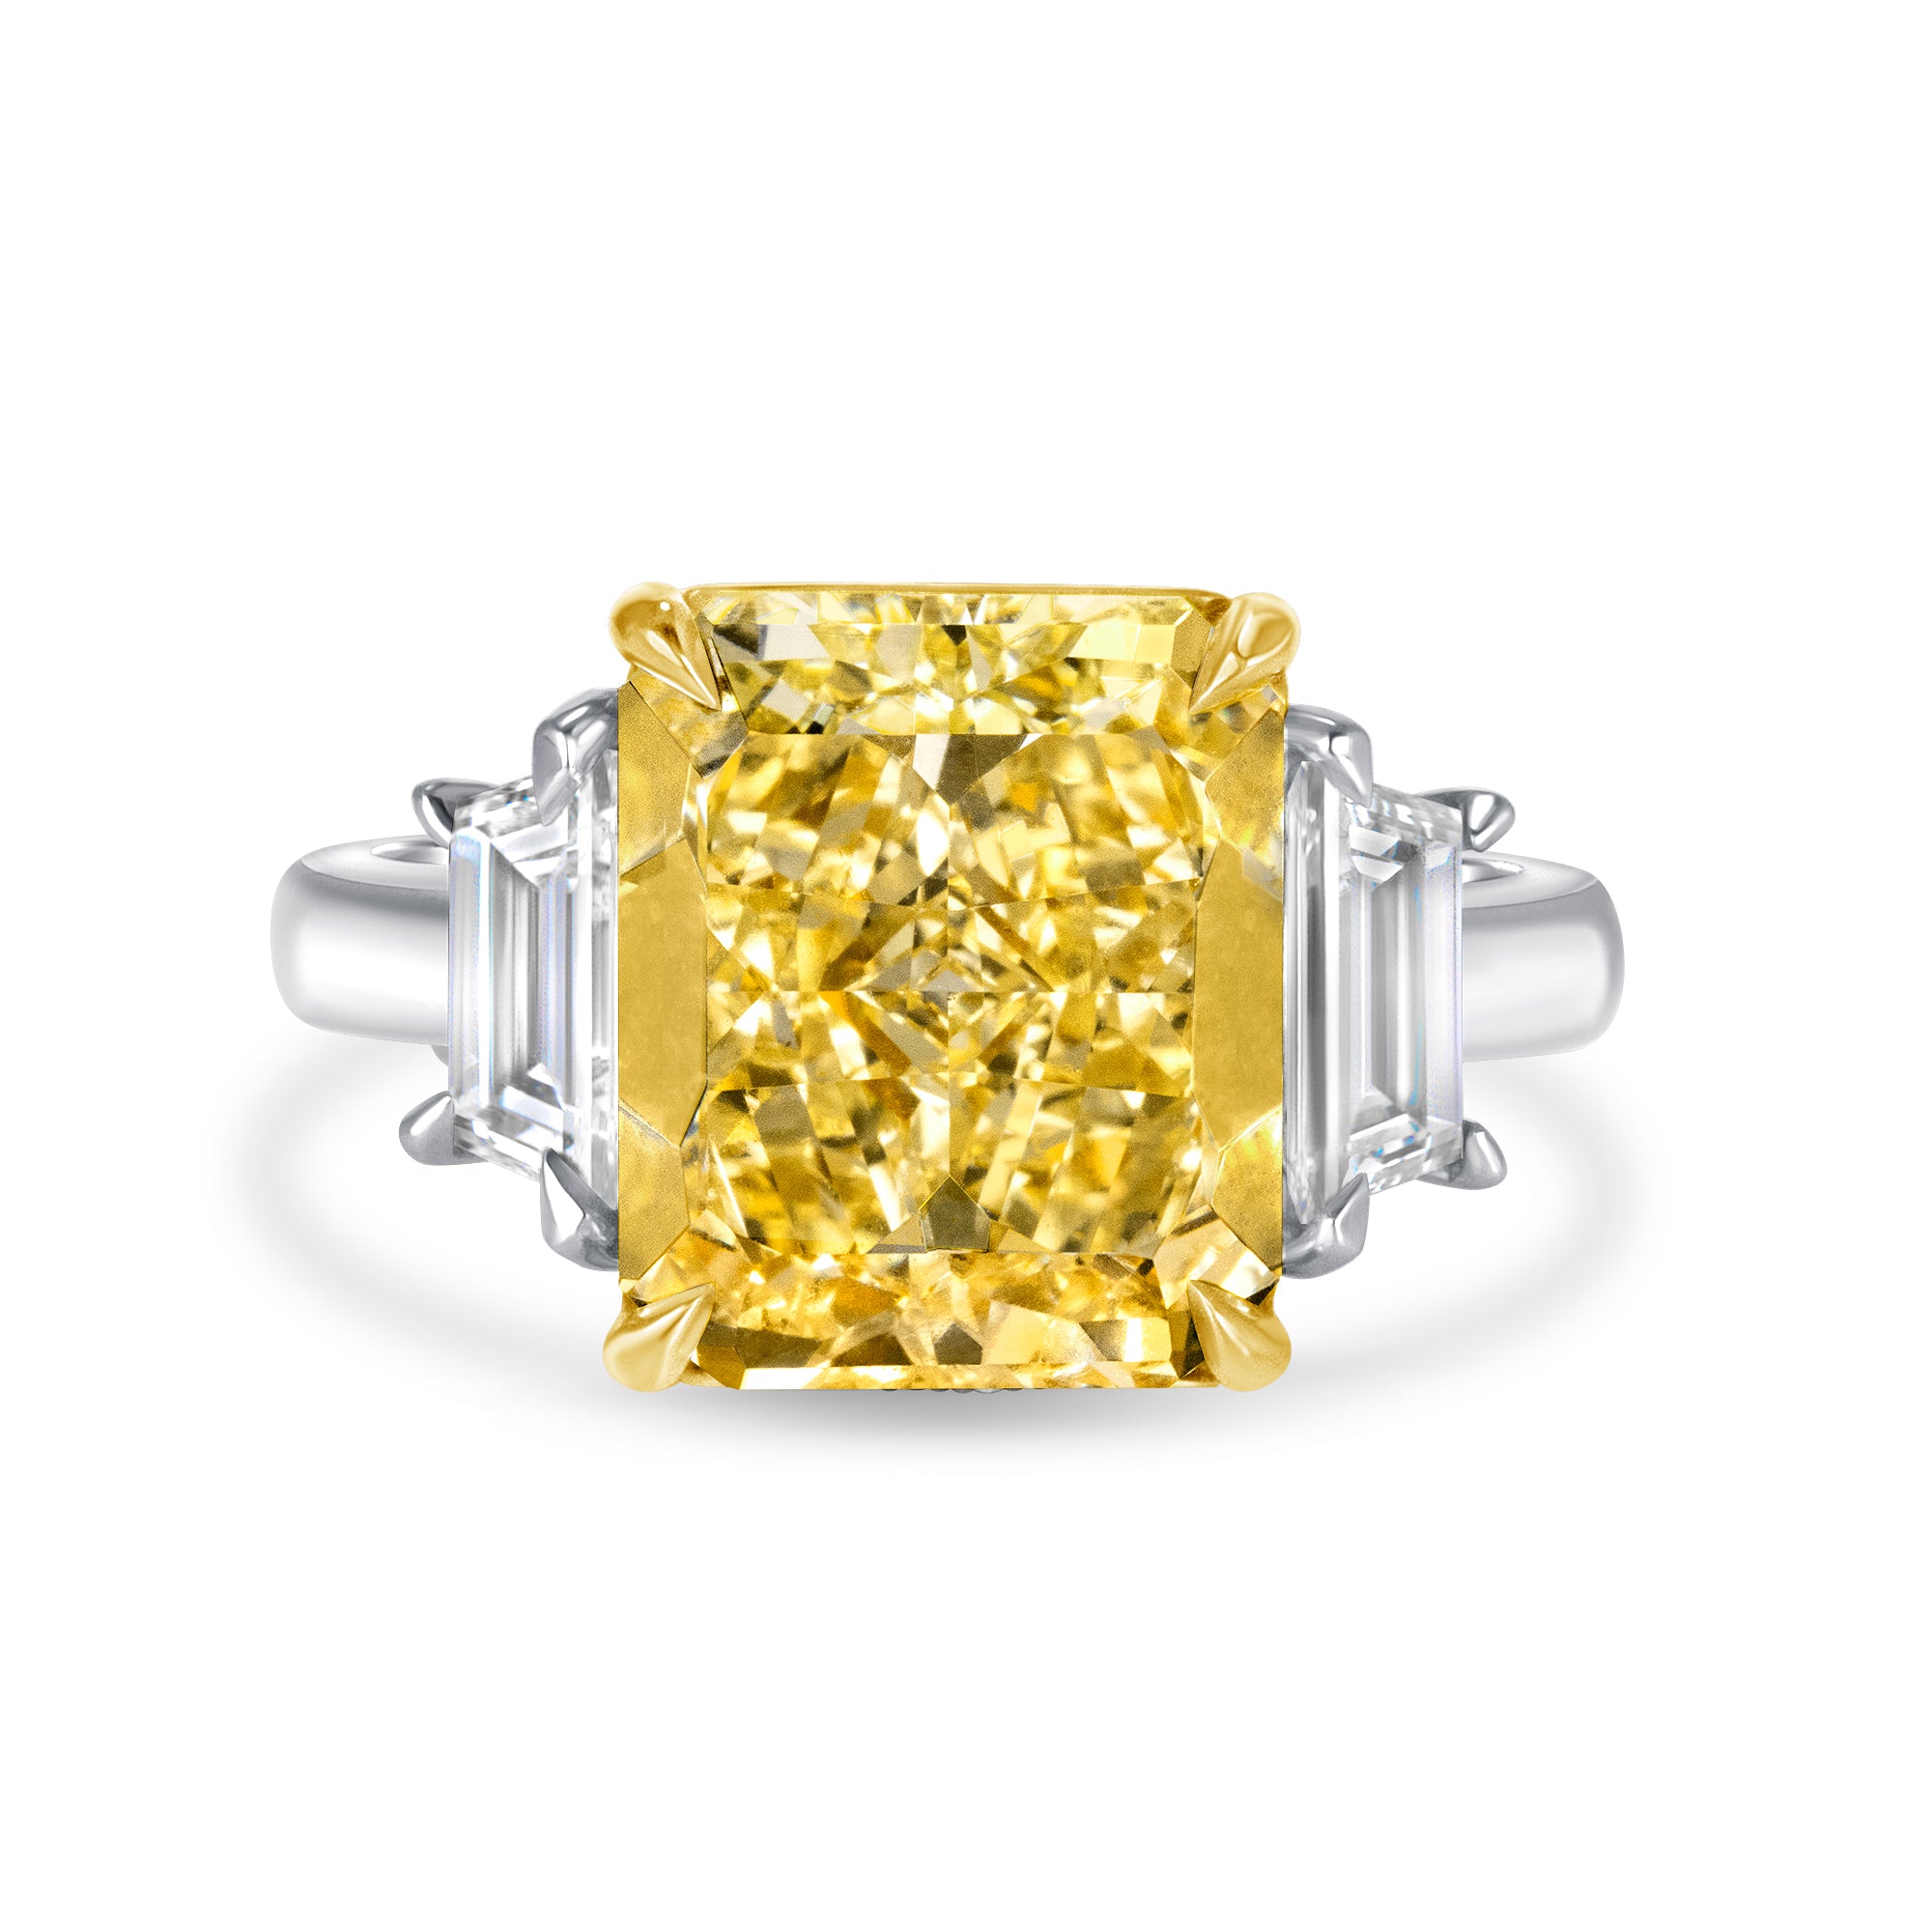 Radiant Cut Fancy Intense Yellow Diamond and Trapezoid Diamond Side Stones Ring in 18 Karat Yellow Gold and Platinum